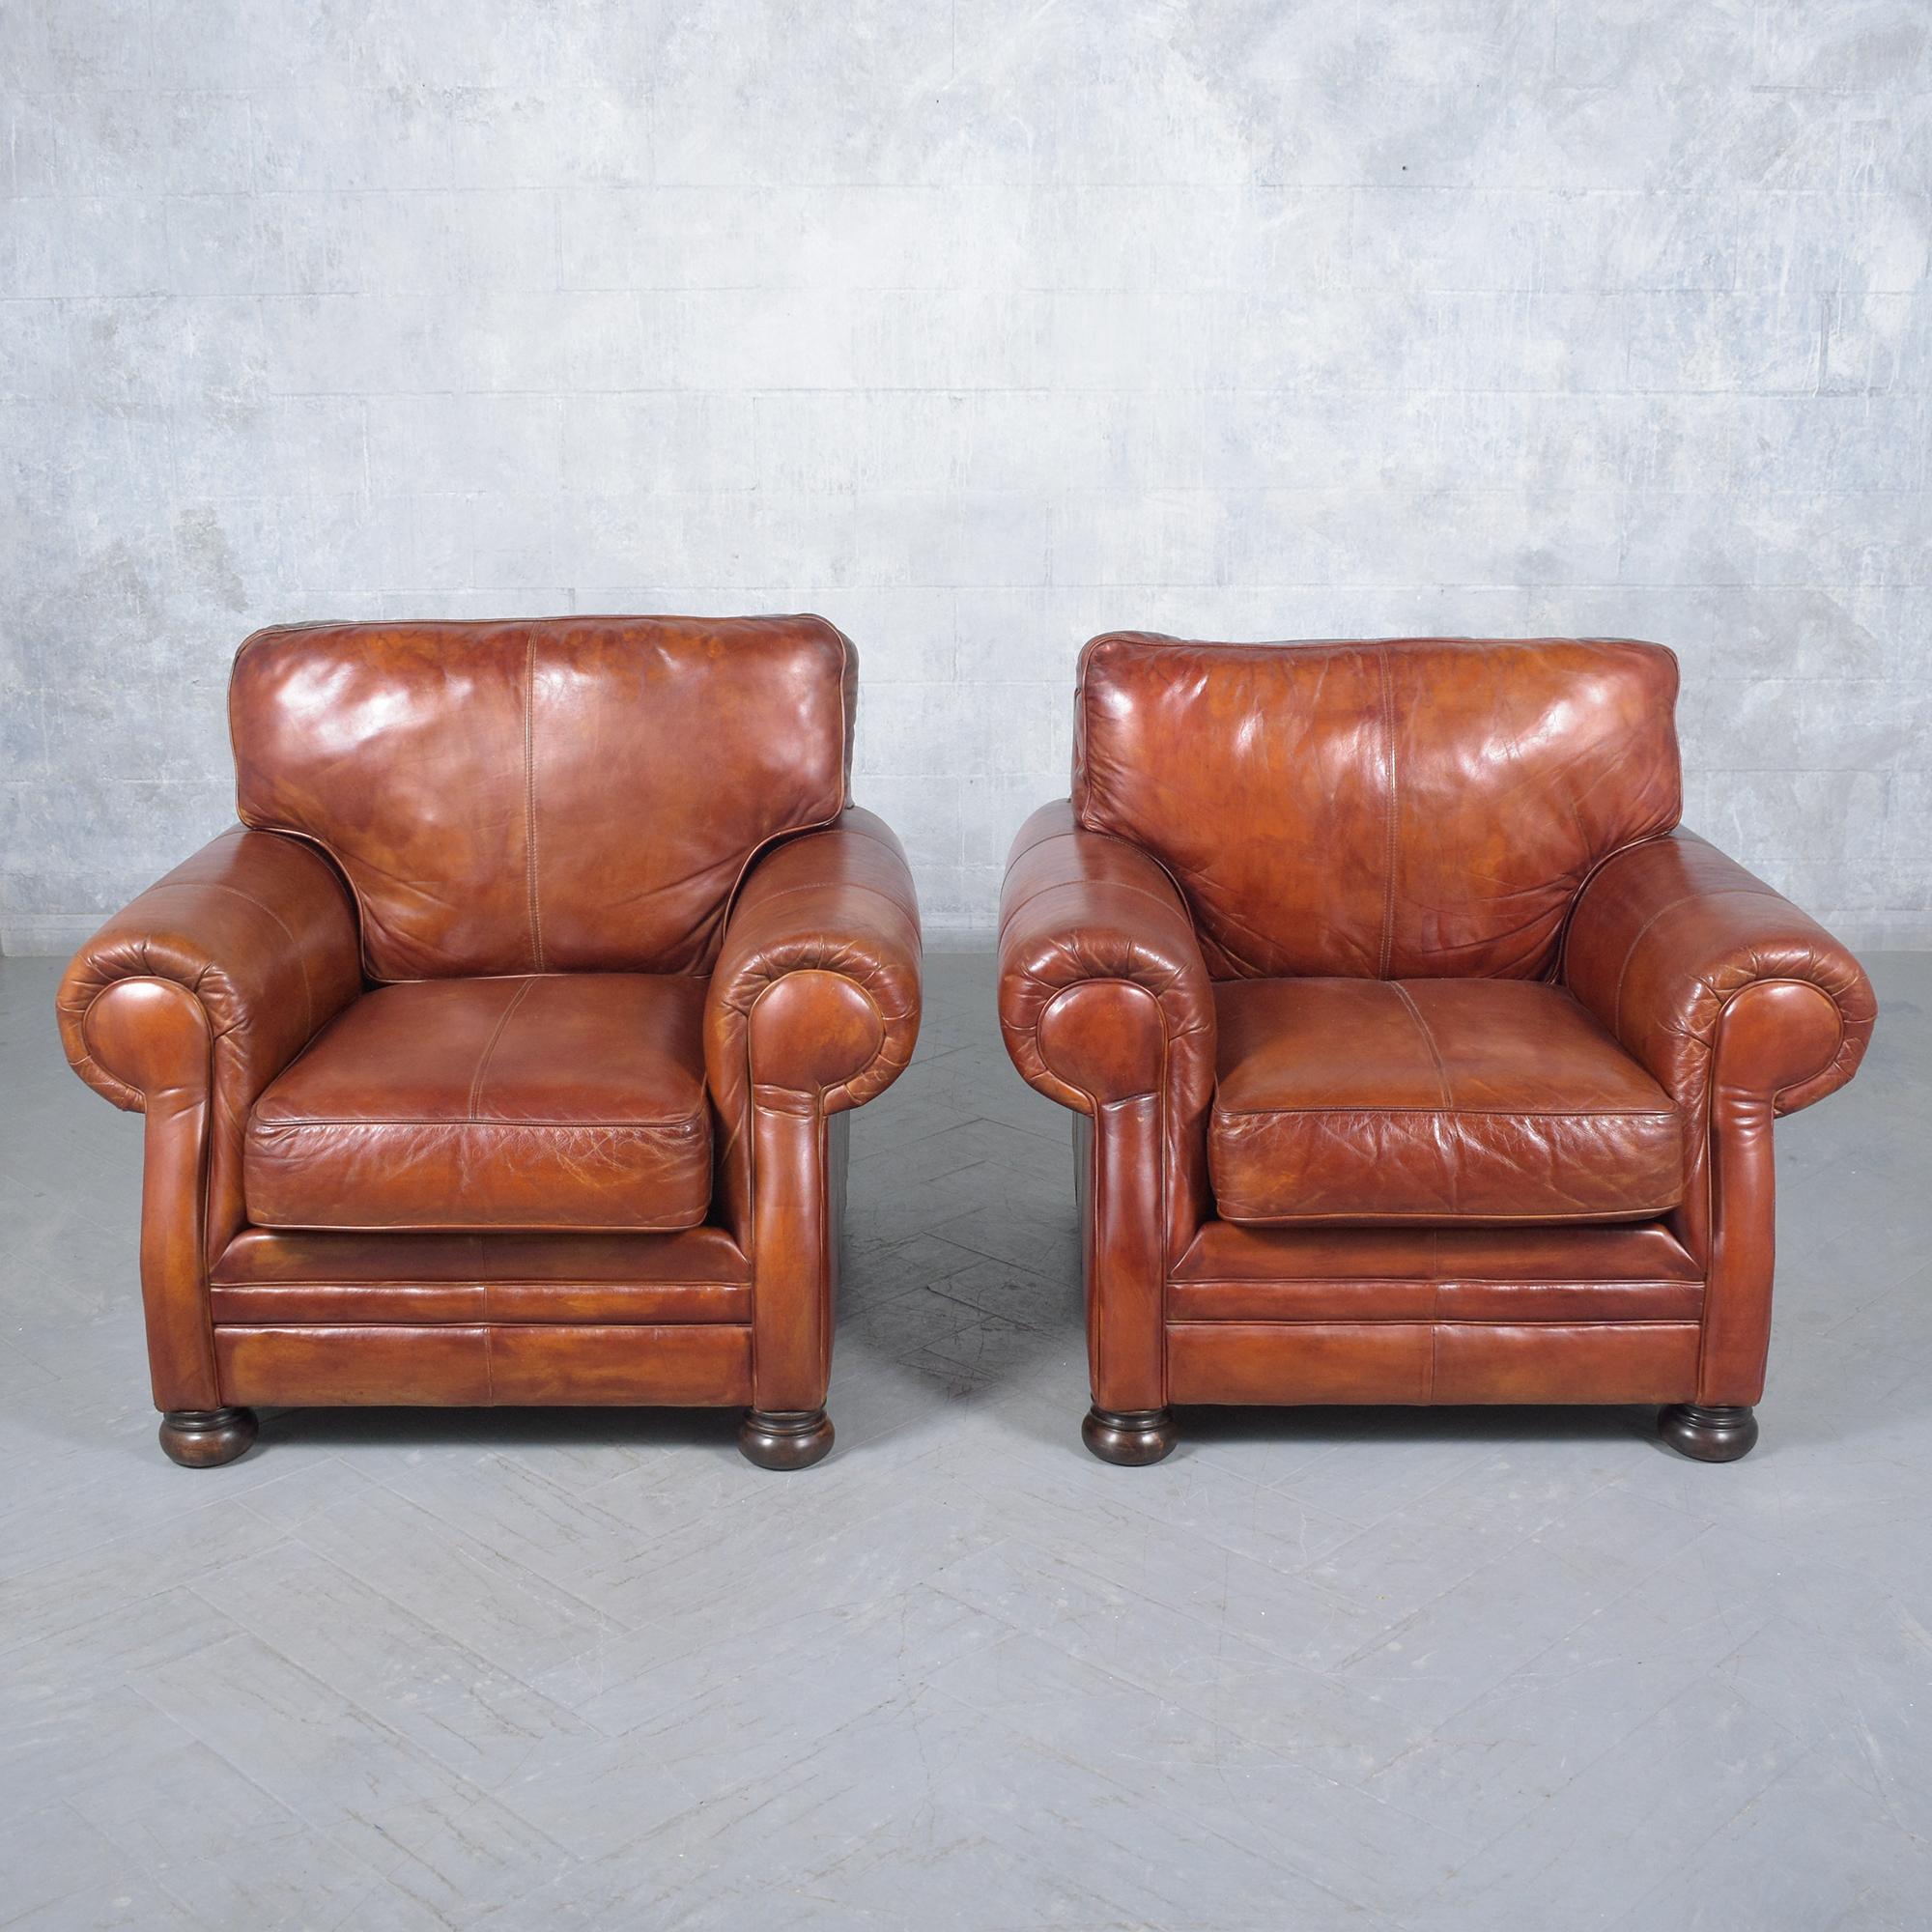 Baroque Restored Vintage Leather Armchairs in Cognac Brown with Carved Bun Legs For Sale